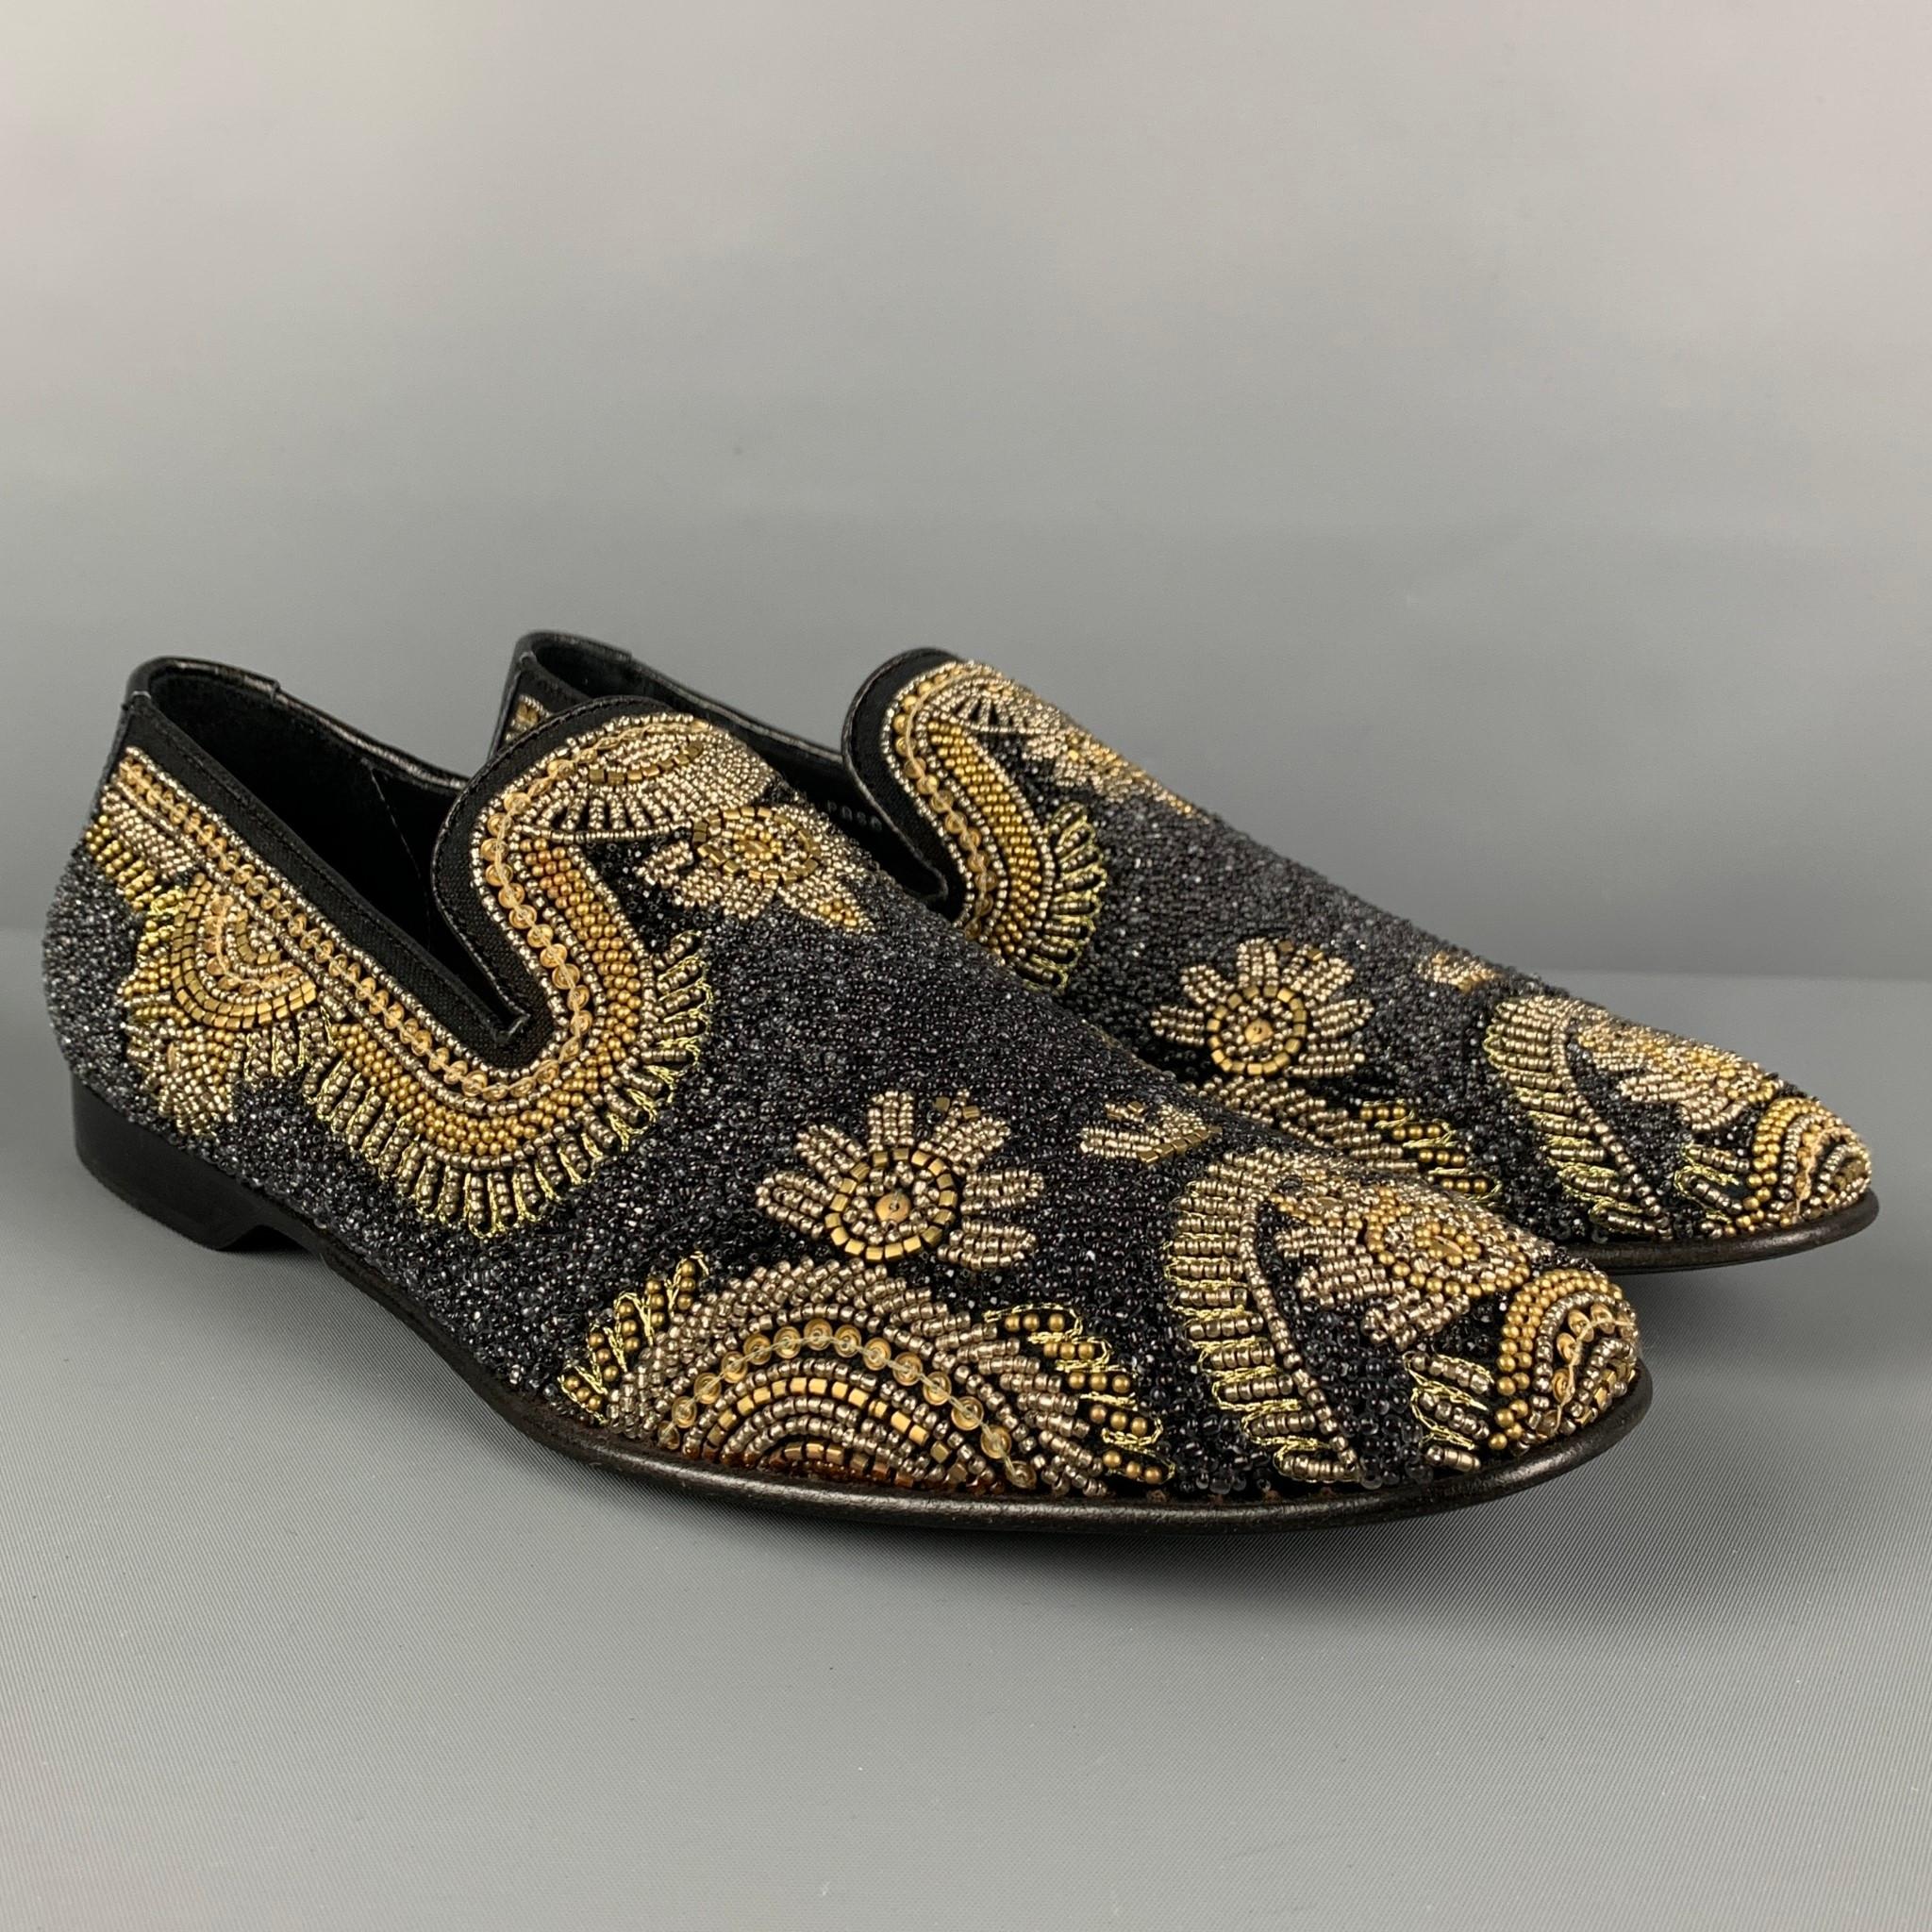 DONALD J PLINER loafers comes in a black & gold beaded leather featuring a slip on style and a square toe. Made in Italy. 

Very Good Pre-Owned Condition.
Marked: 9 M

Outsole: 11.75 in. x 4 in. 